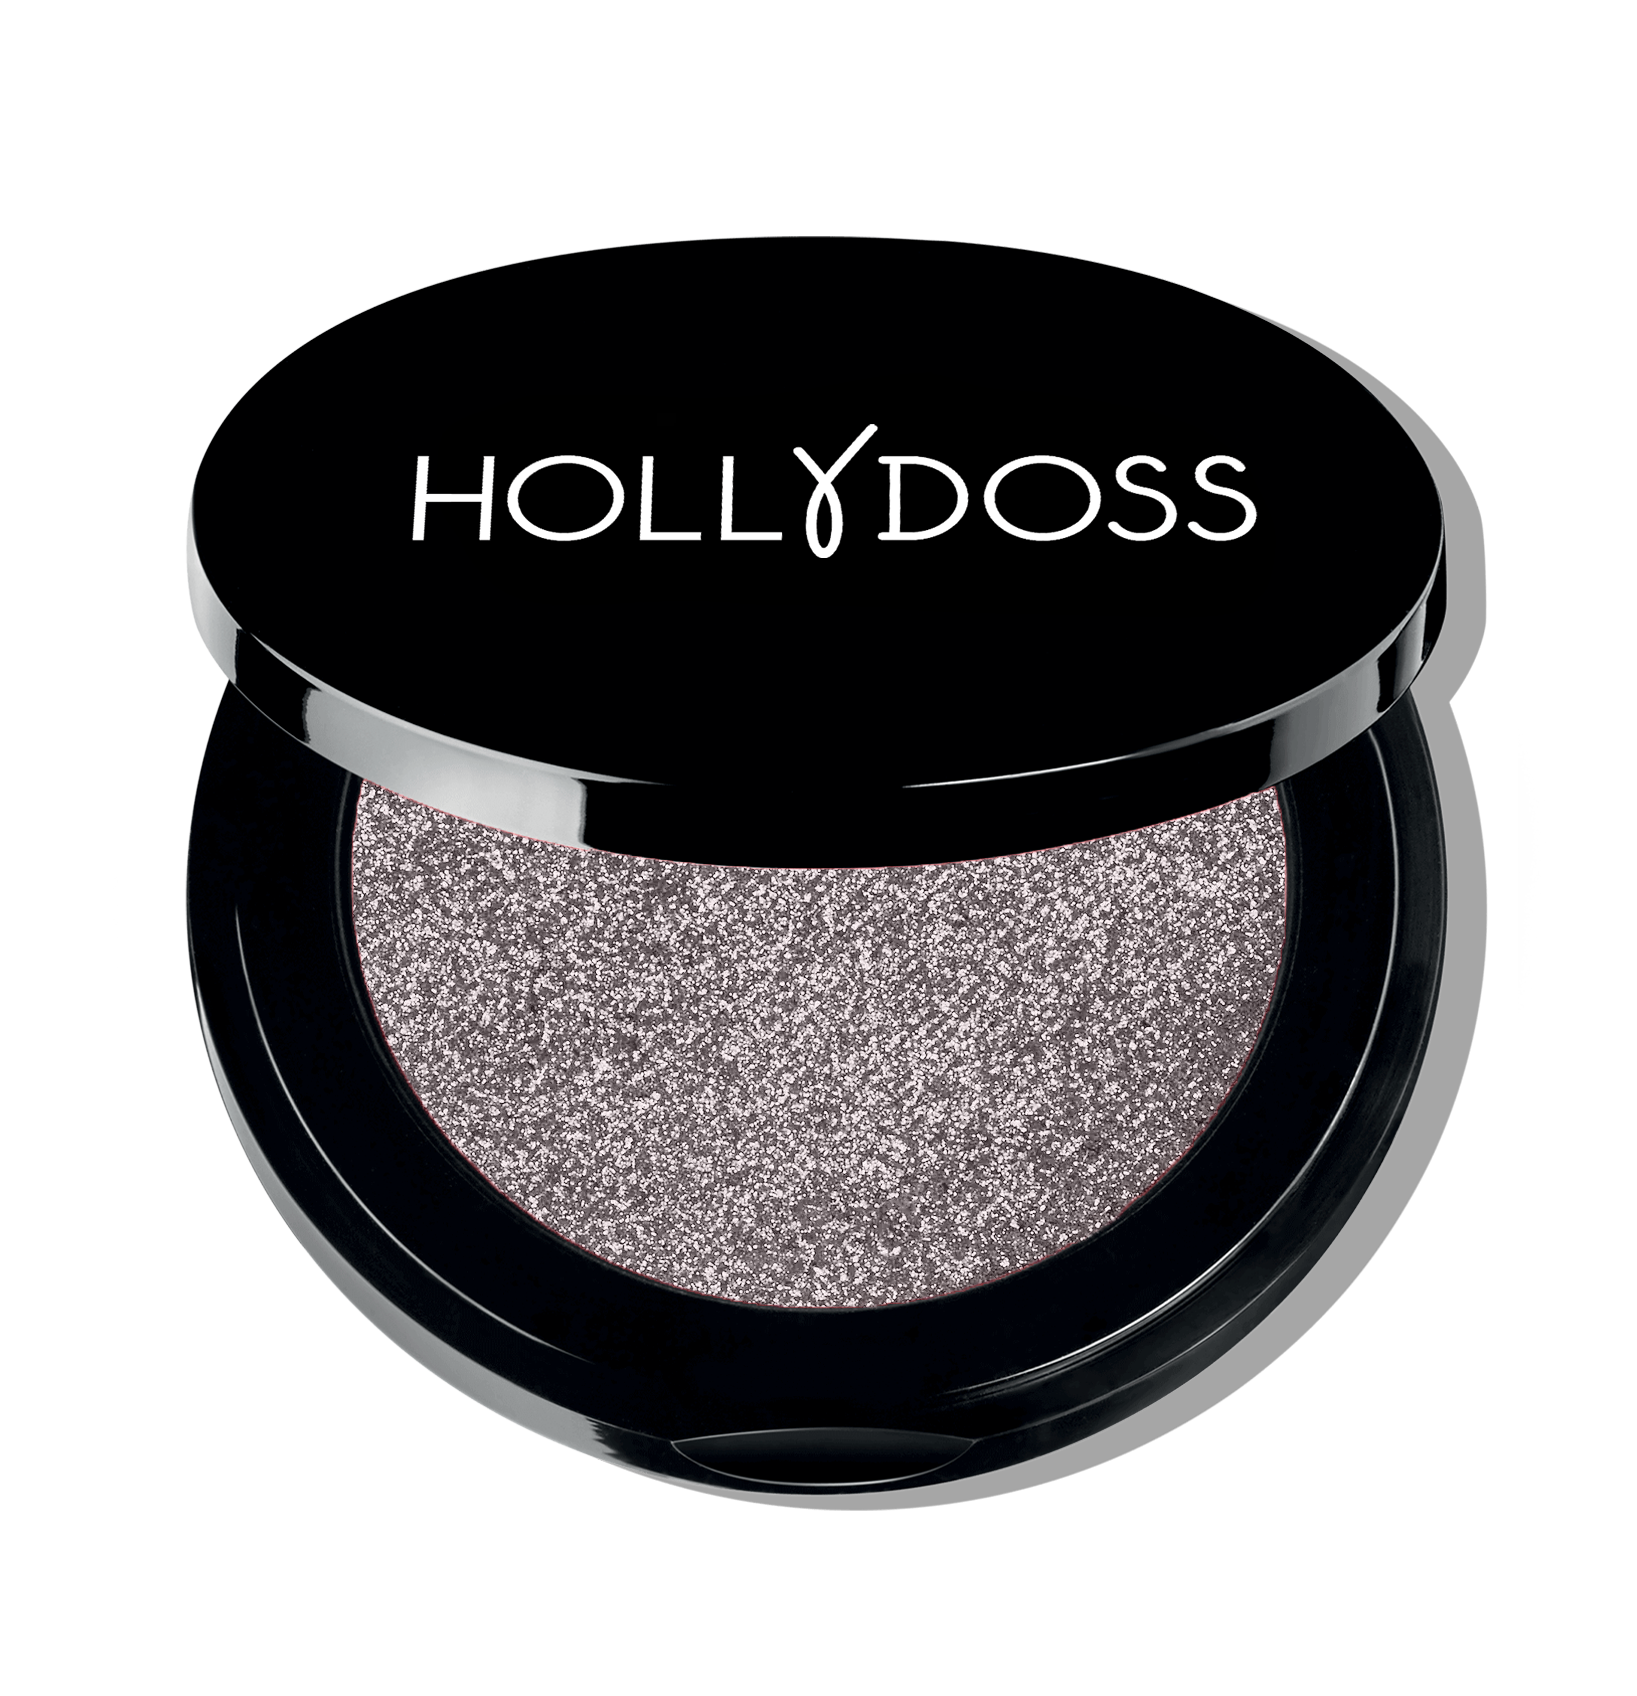 EYESHADOW *LG - Holly Doss Official